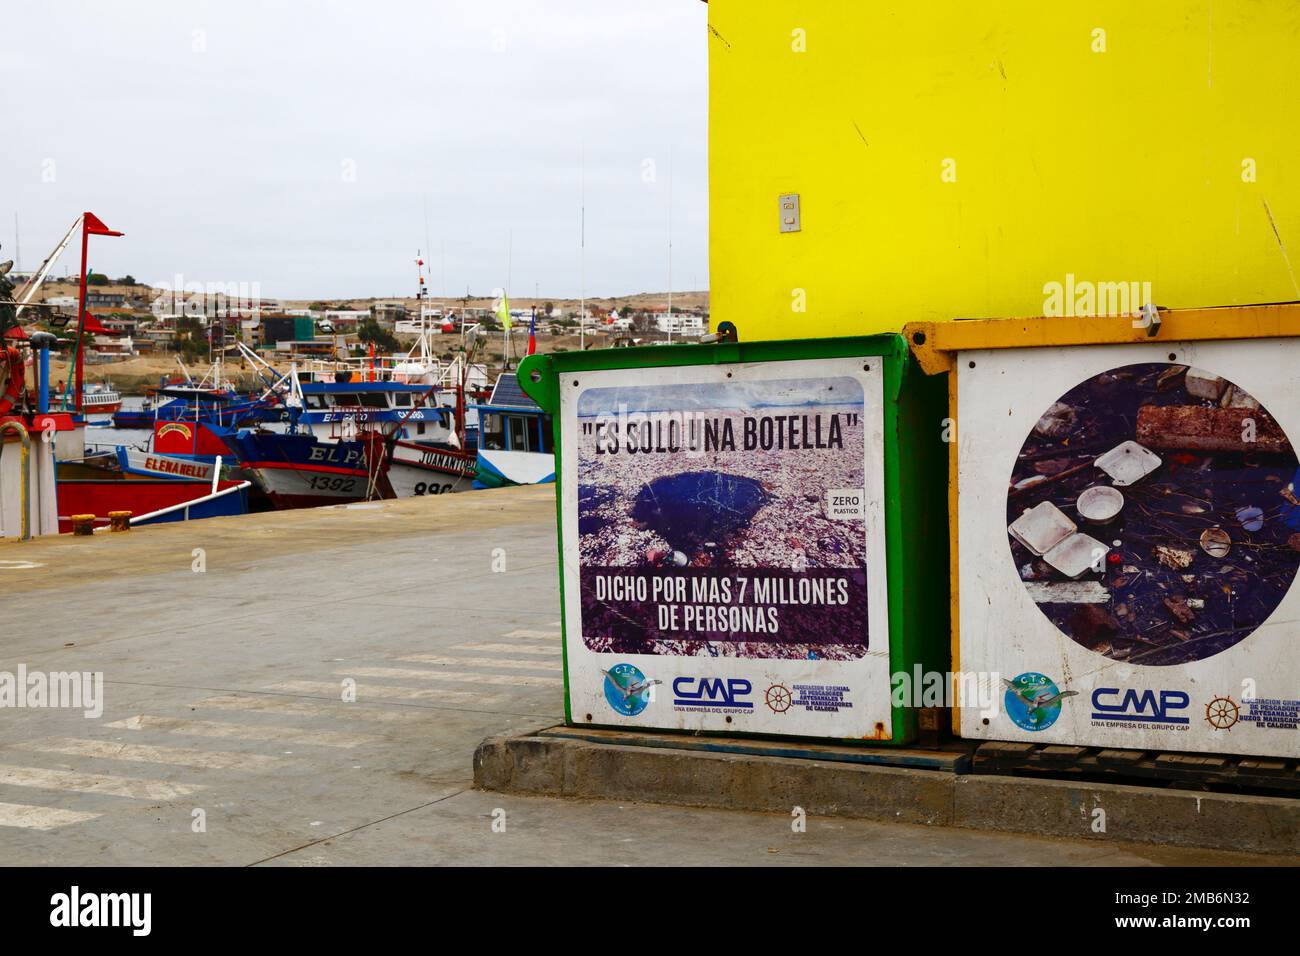 Sign in fishing docks encouraging people and fishermen not to throw plastic bottles into the sea, Caldera, Region III, Chile. The Spanish translates as 'It's only one bottle, said more than 7 million people'. Stock Photo